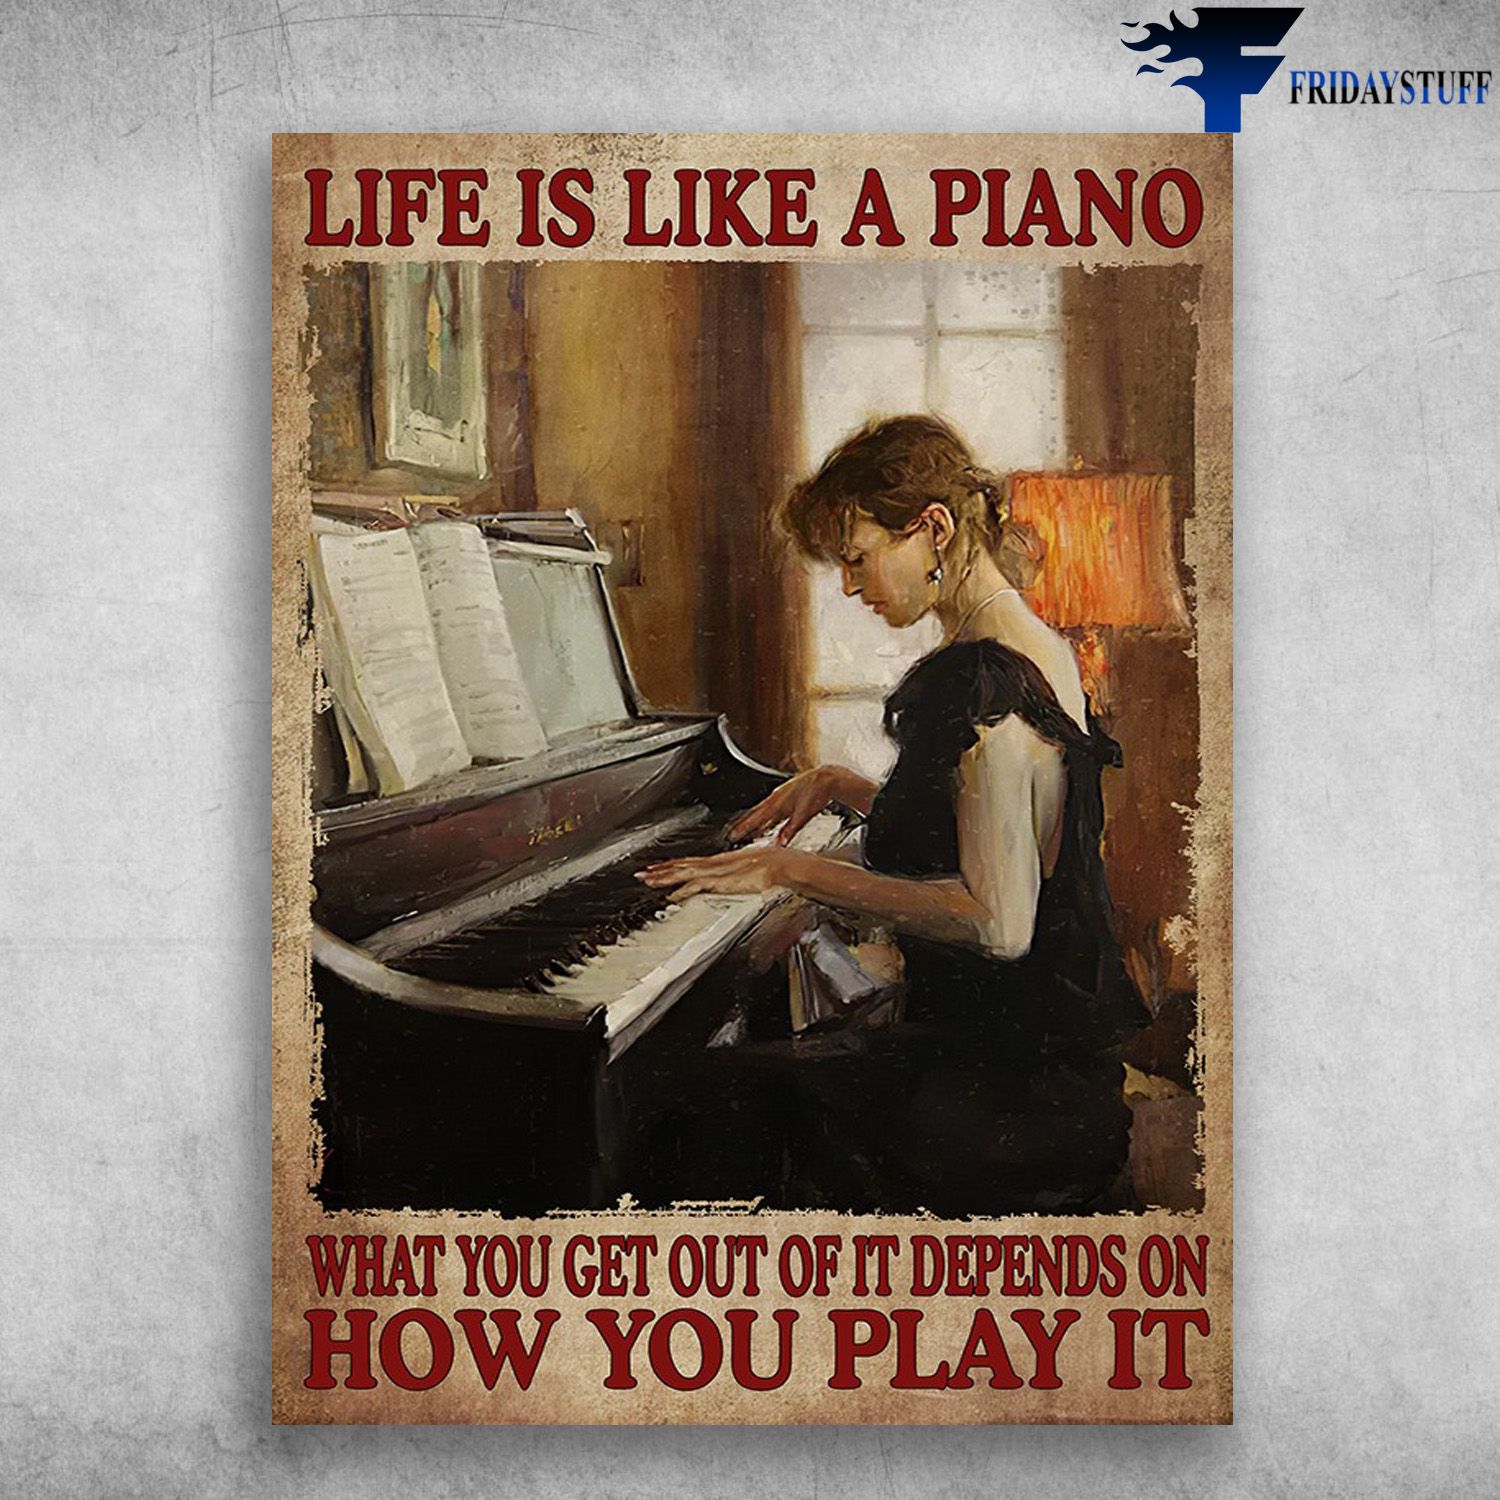 Piano Lover, Girl Plays Piano - Life Is Like A Piano, What You Get Our Of It Depends On, How You Play It